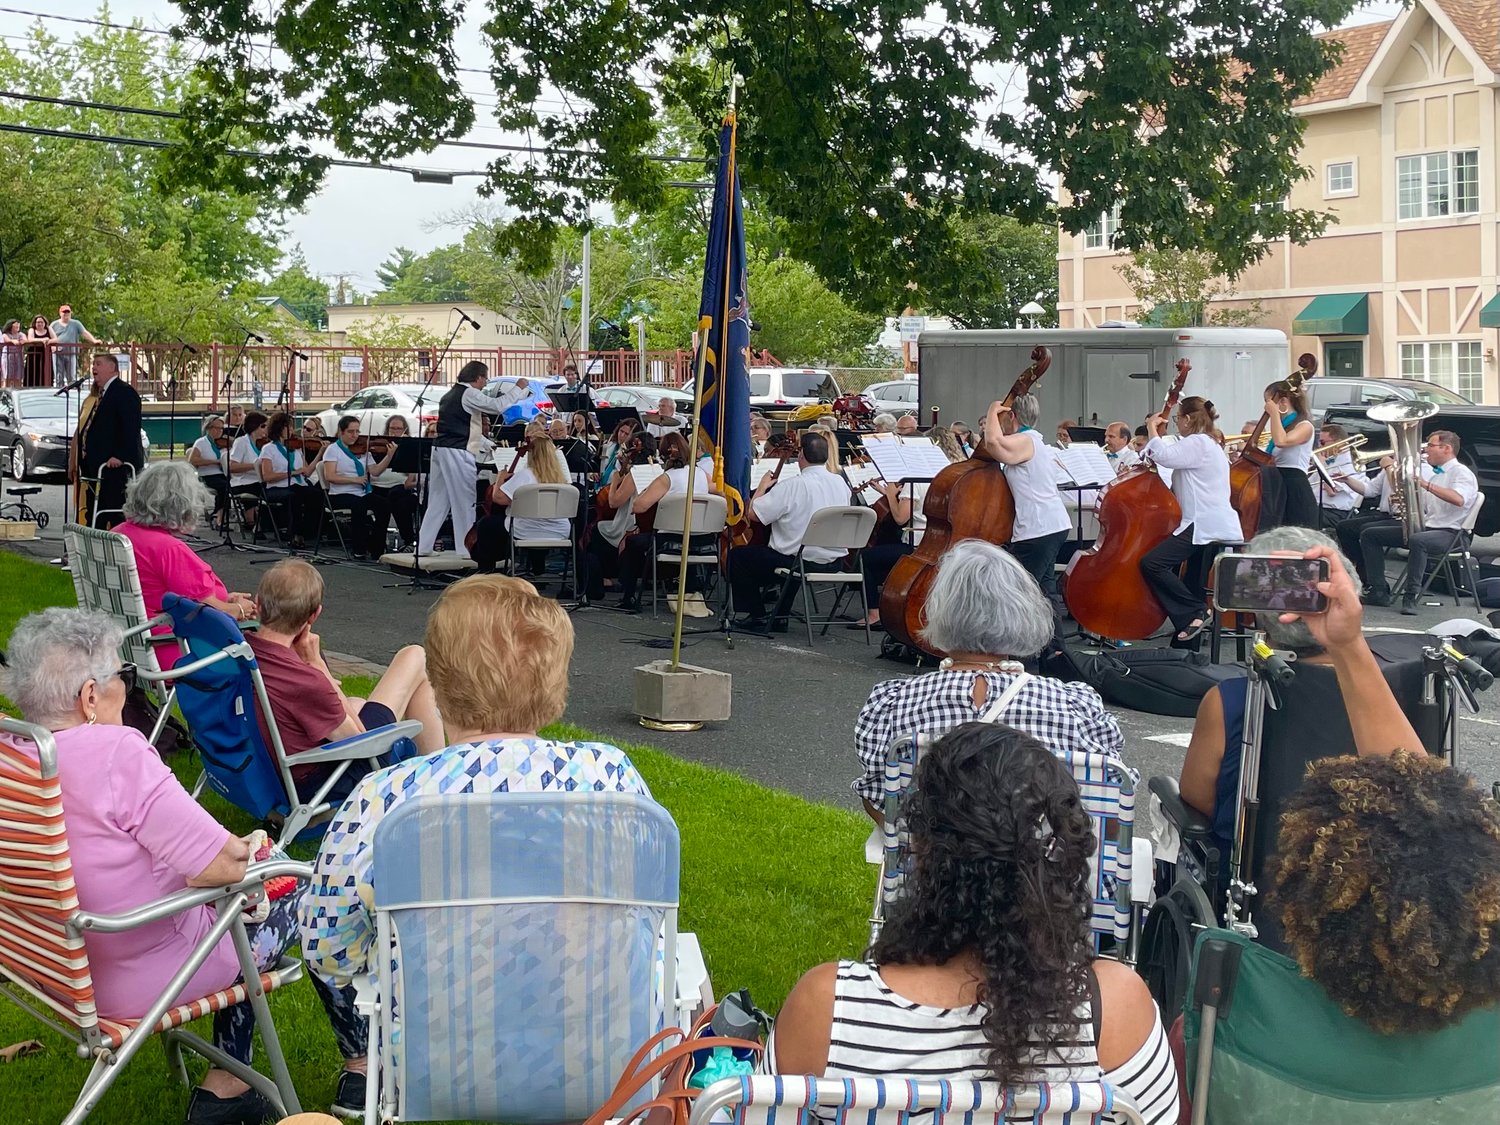 The orchestra performance was the last in the Pops’ summer programs, but the first in Malverne’s summer concert series.